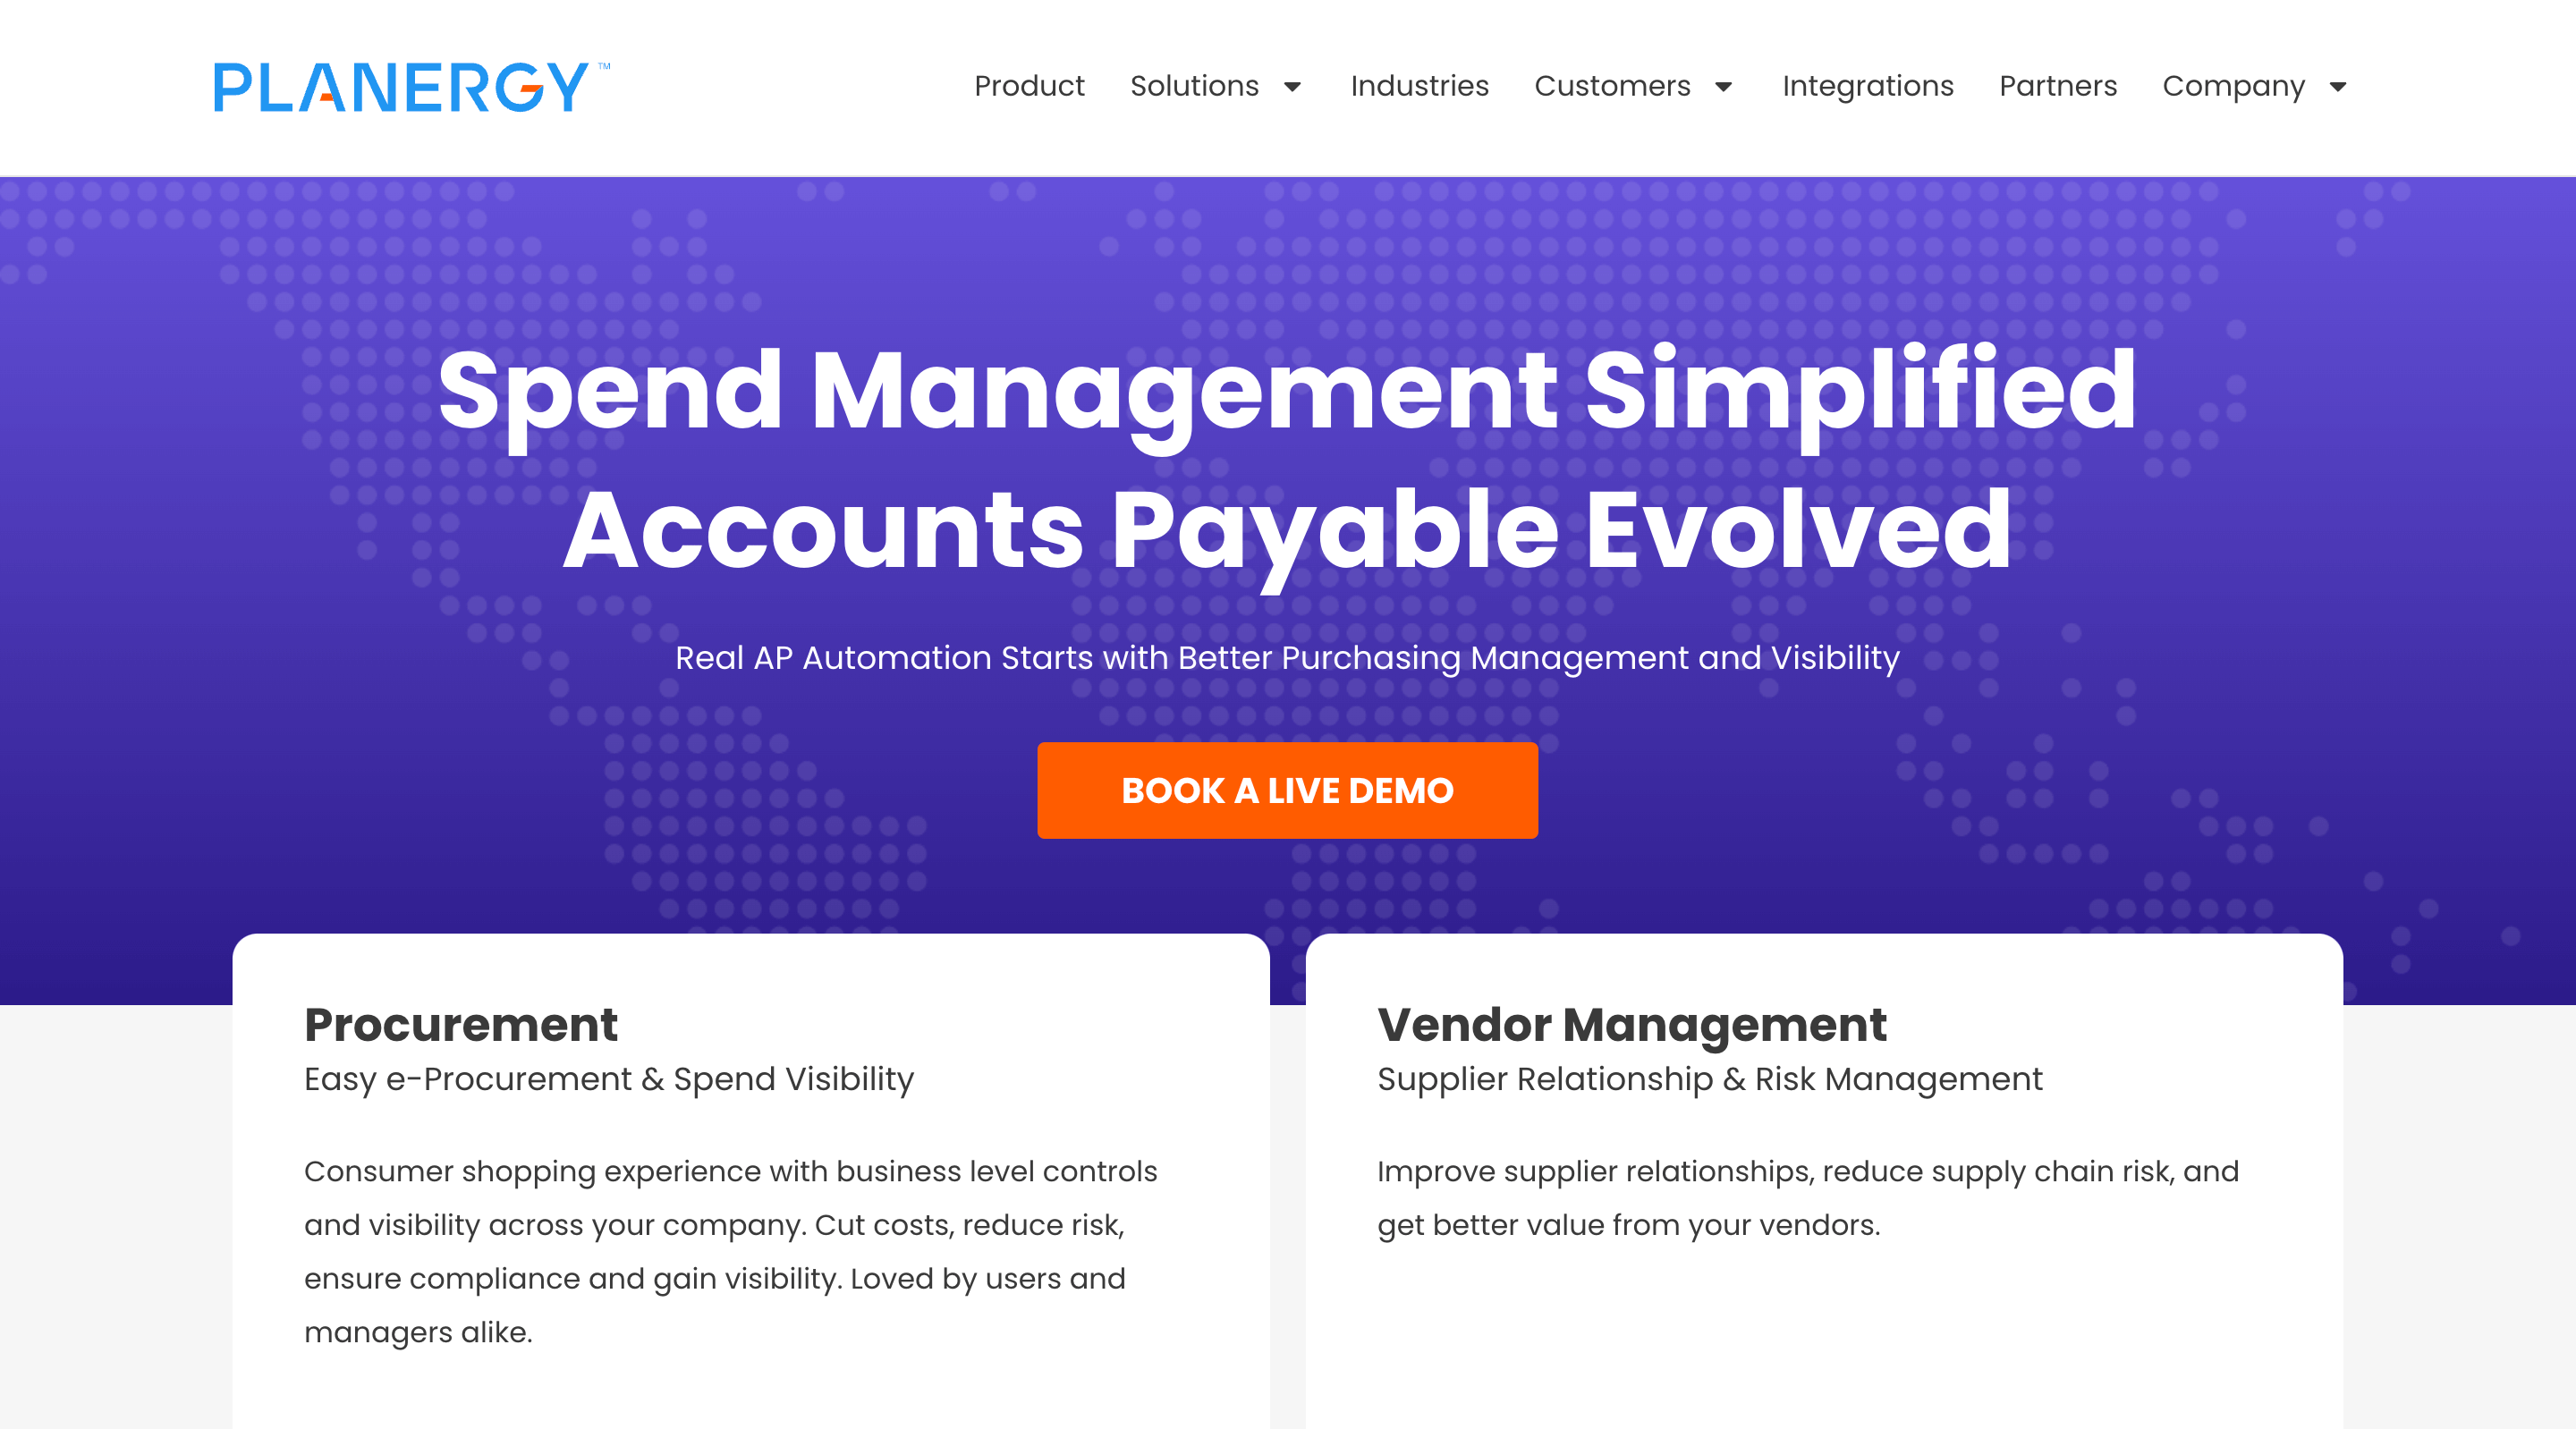 Planergy homepage: Spend Management Simplified Accounts Payable Evolved